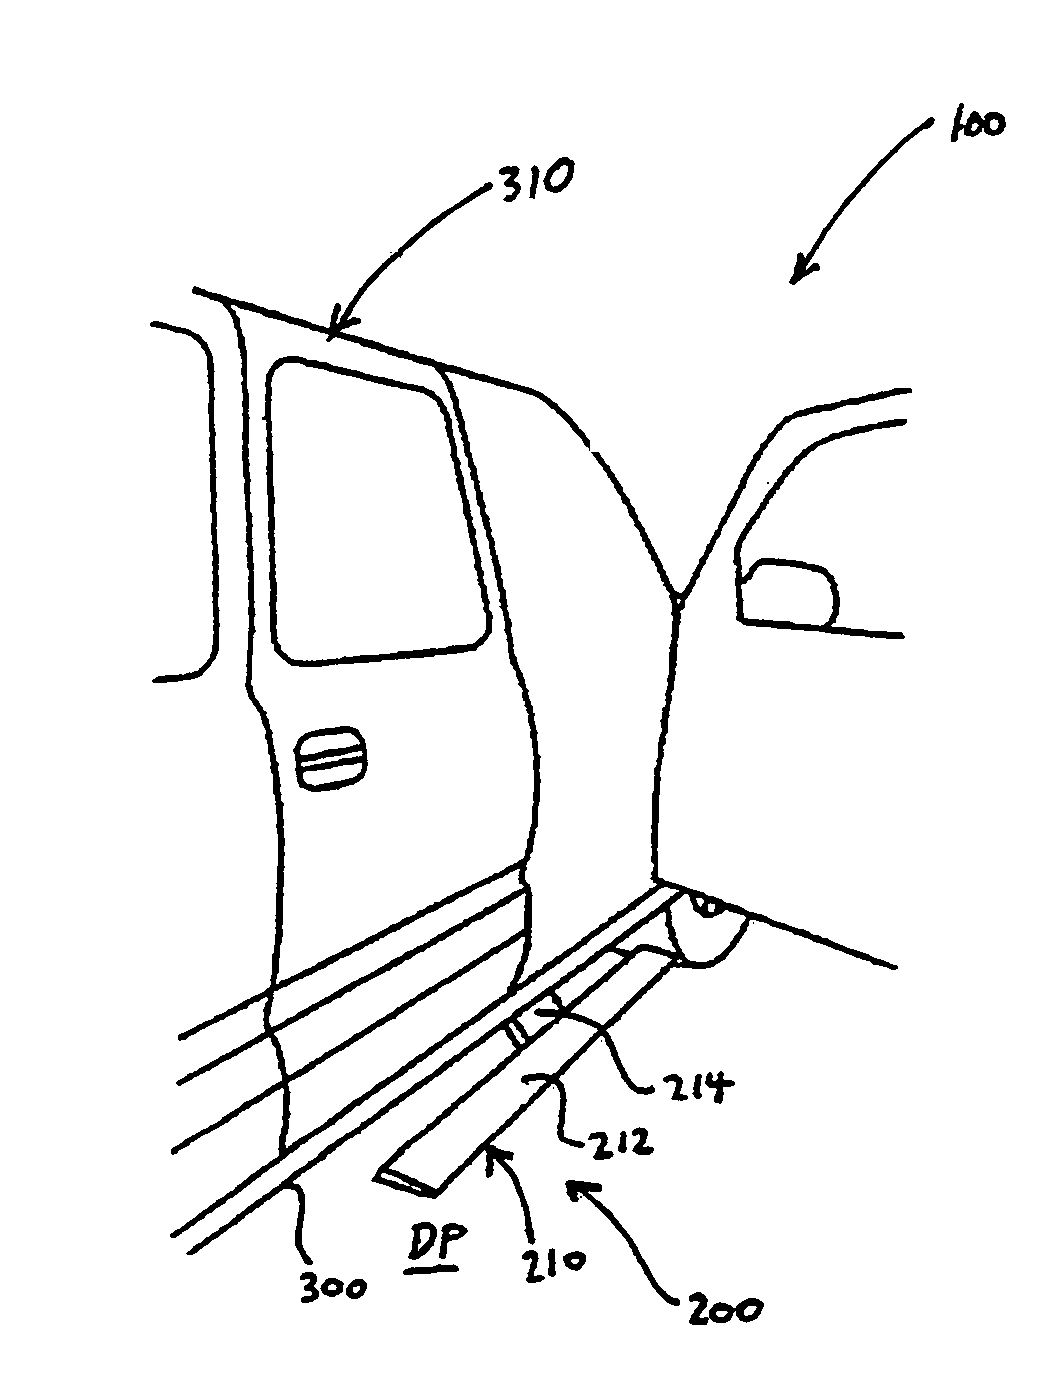 Drive systems for retractable vehicle step